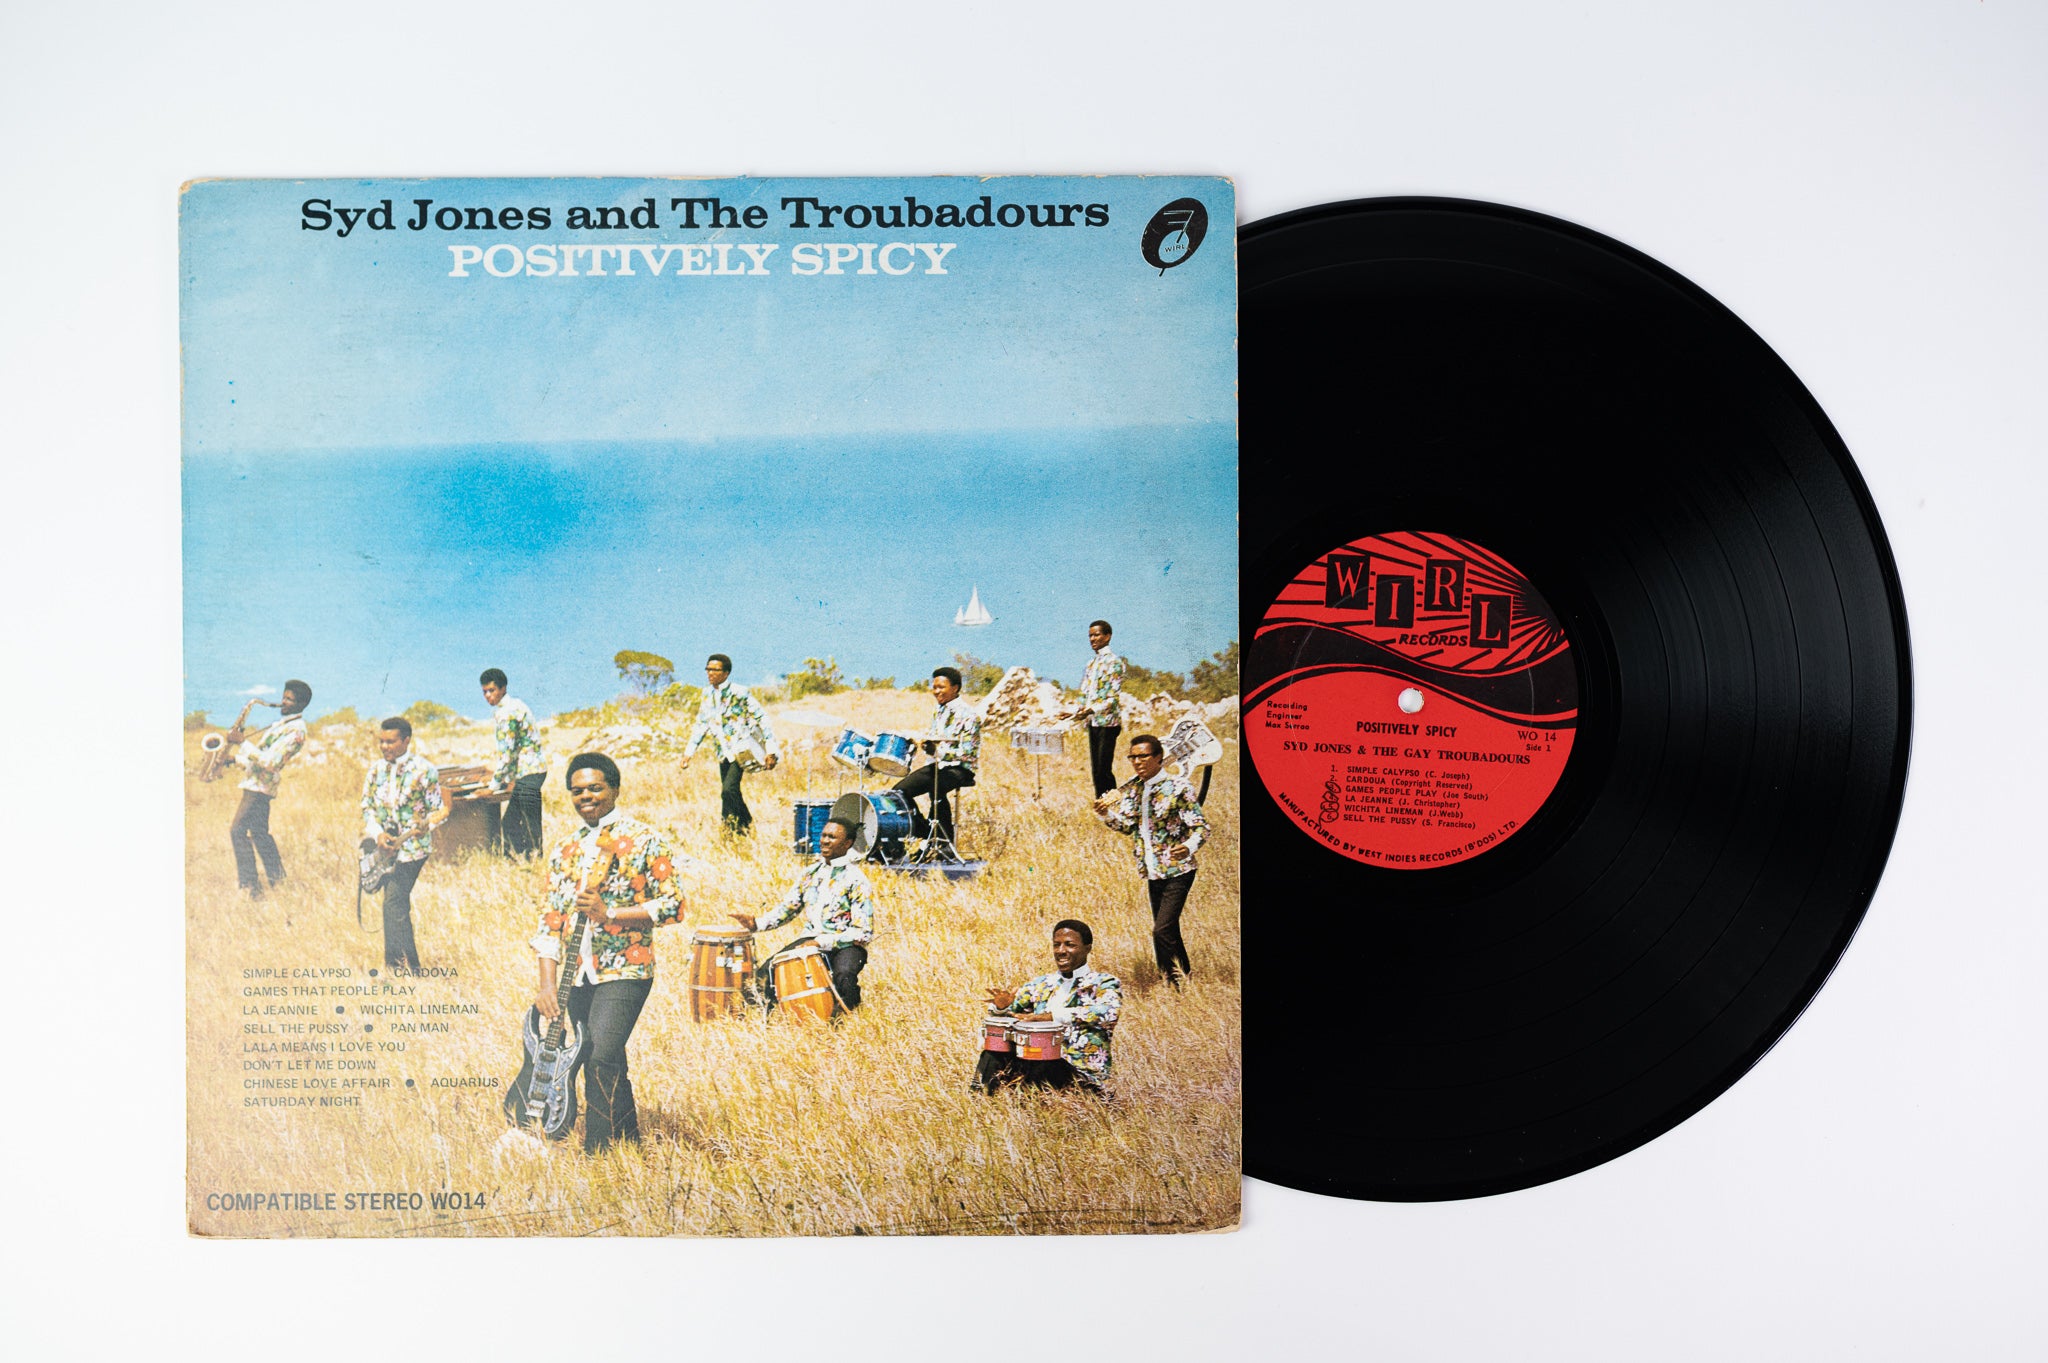 Syd Jones And The Troubadours - Positively Spicy on Wirl